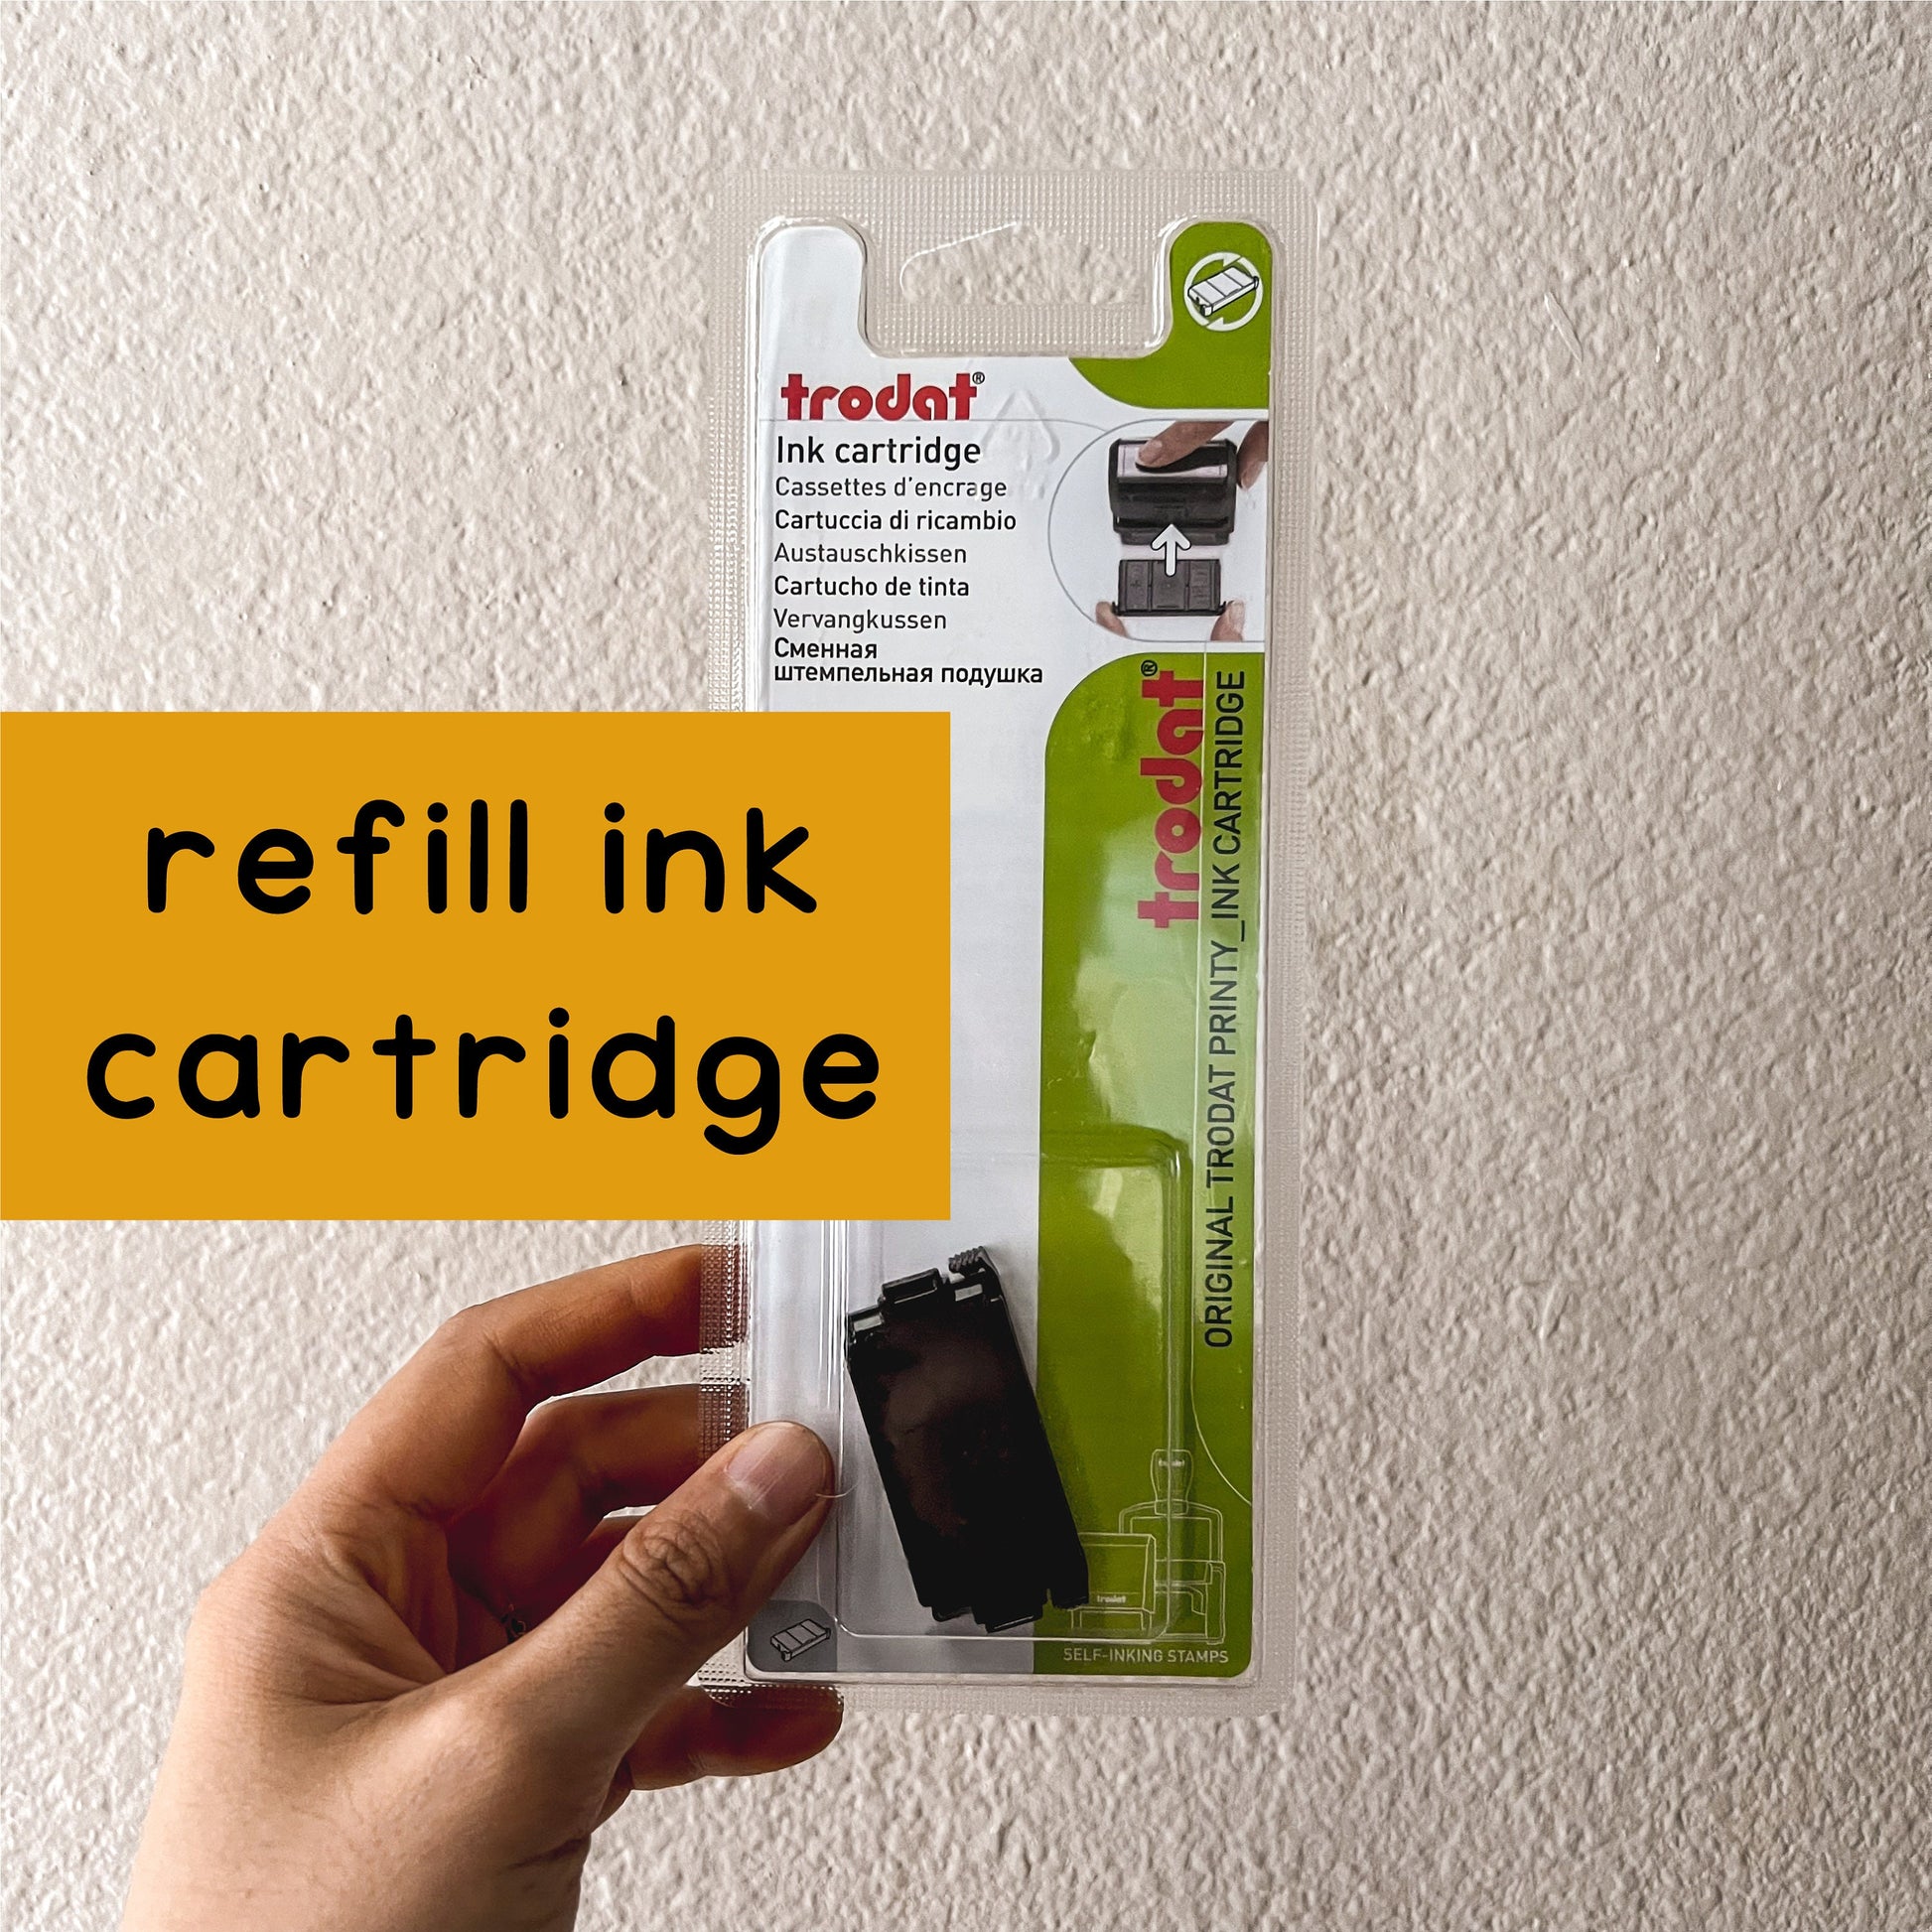 Refill Ink Cartridge for Clothing Stamp | Refill Ink Cartridge for Trodat 4911 Fabric Stamp